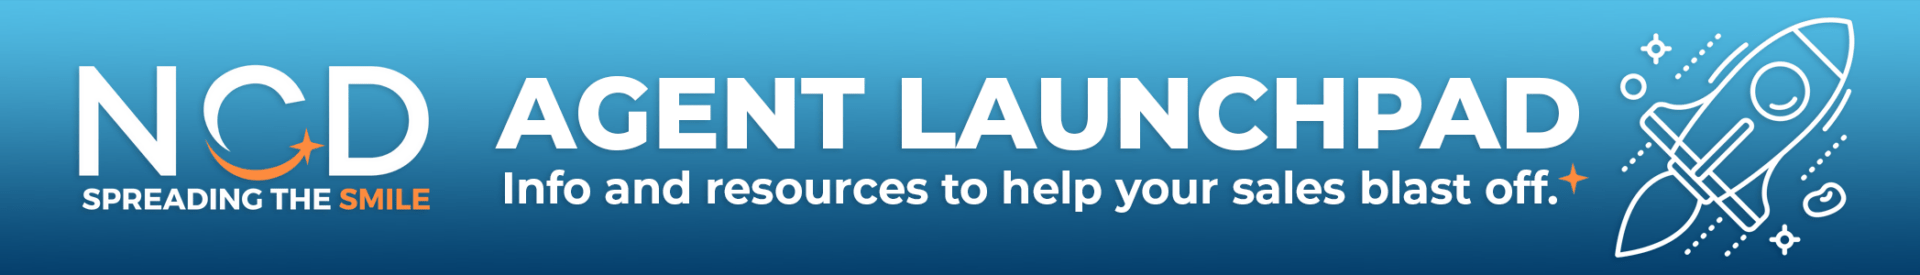 NCD Agent Launchpad - Info and resources to help your sales blast off.